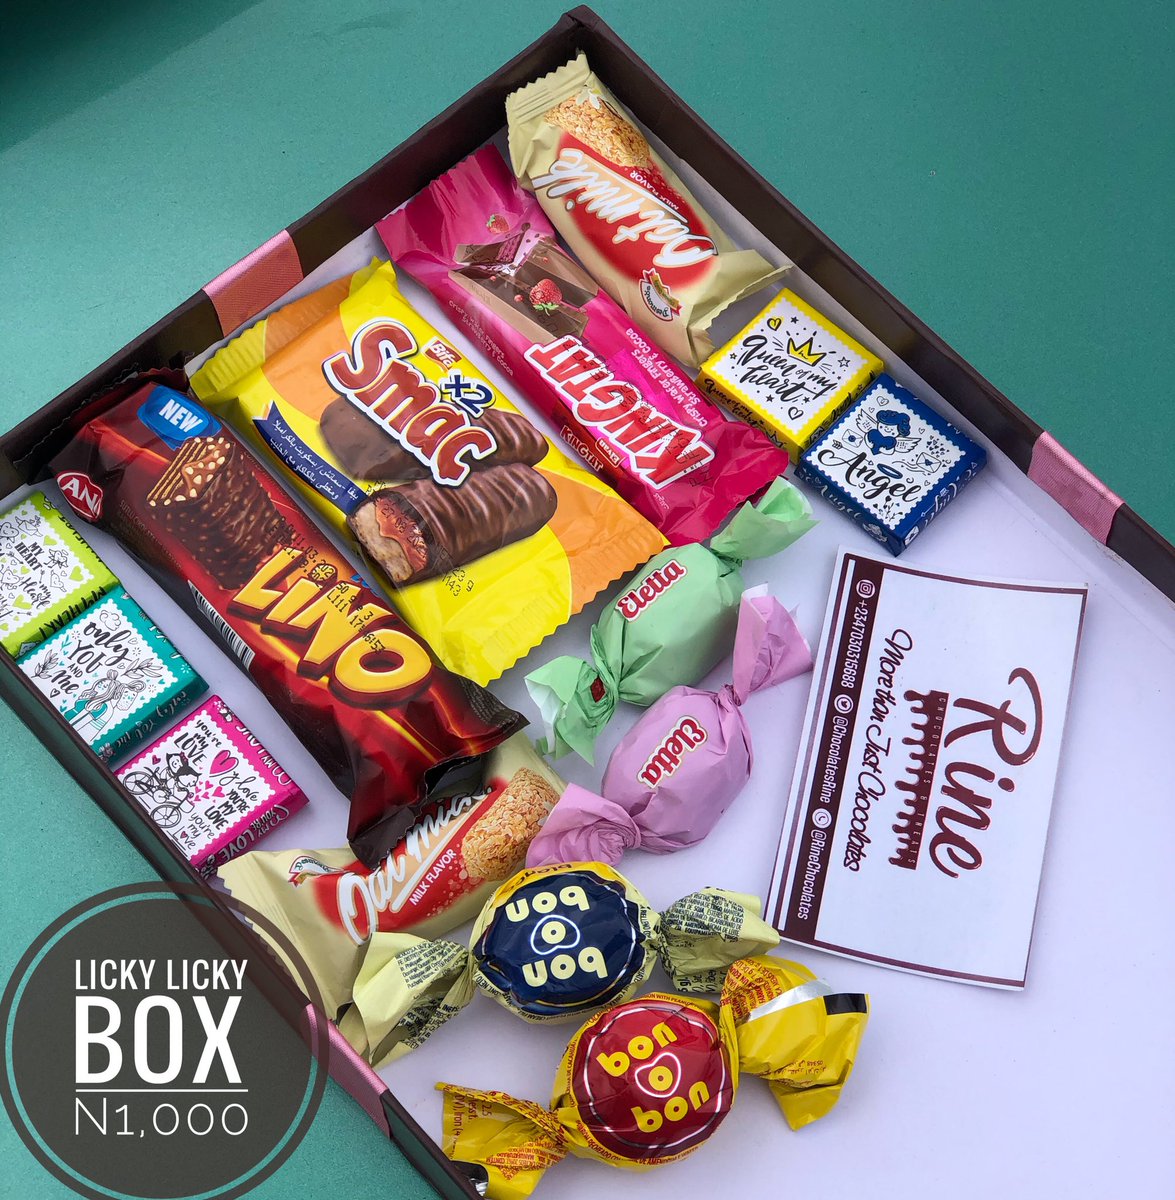 Hey Chocolatey Person!This is our Licky Licky Chocolate Box.It is readily available for delivery or pickup upon order.Kindly send a dm to order a box or more for yourself and loved ones.Lots of chocolates,Rine.